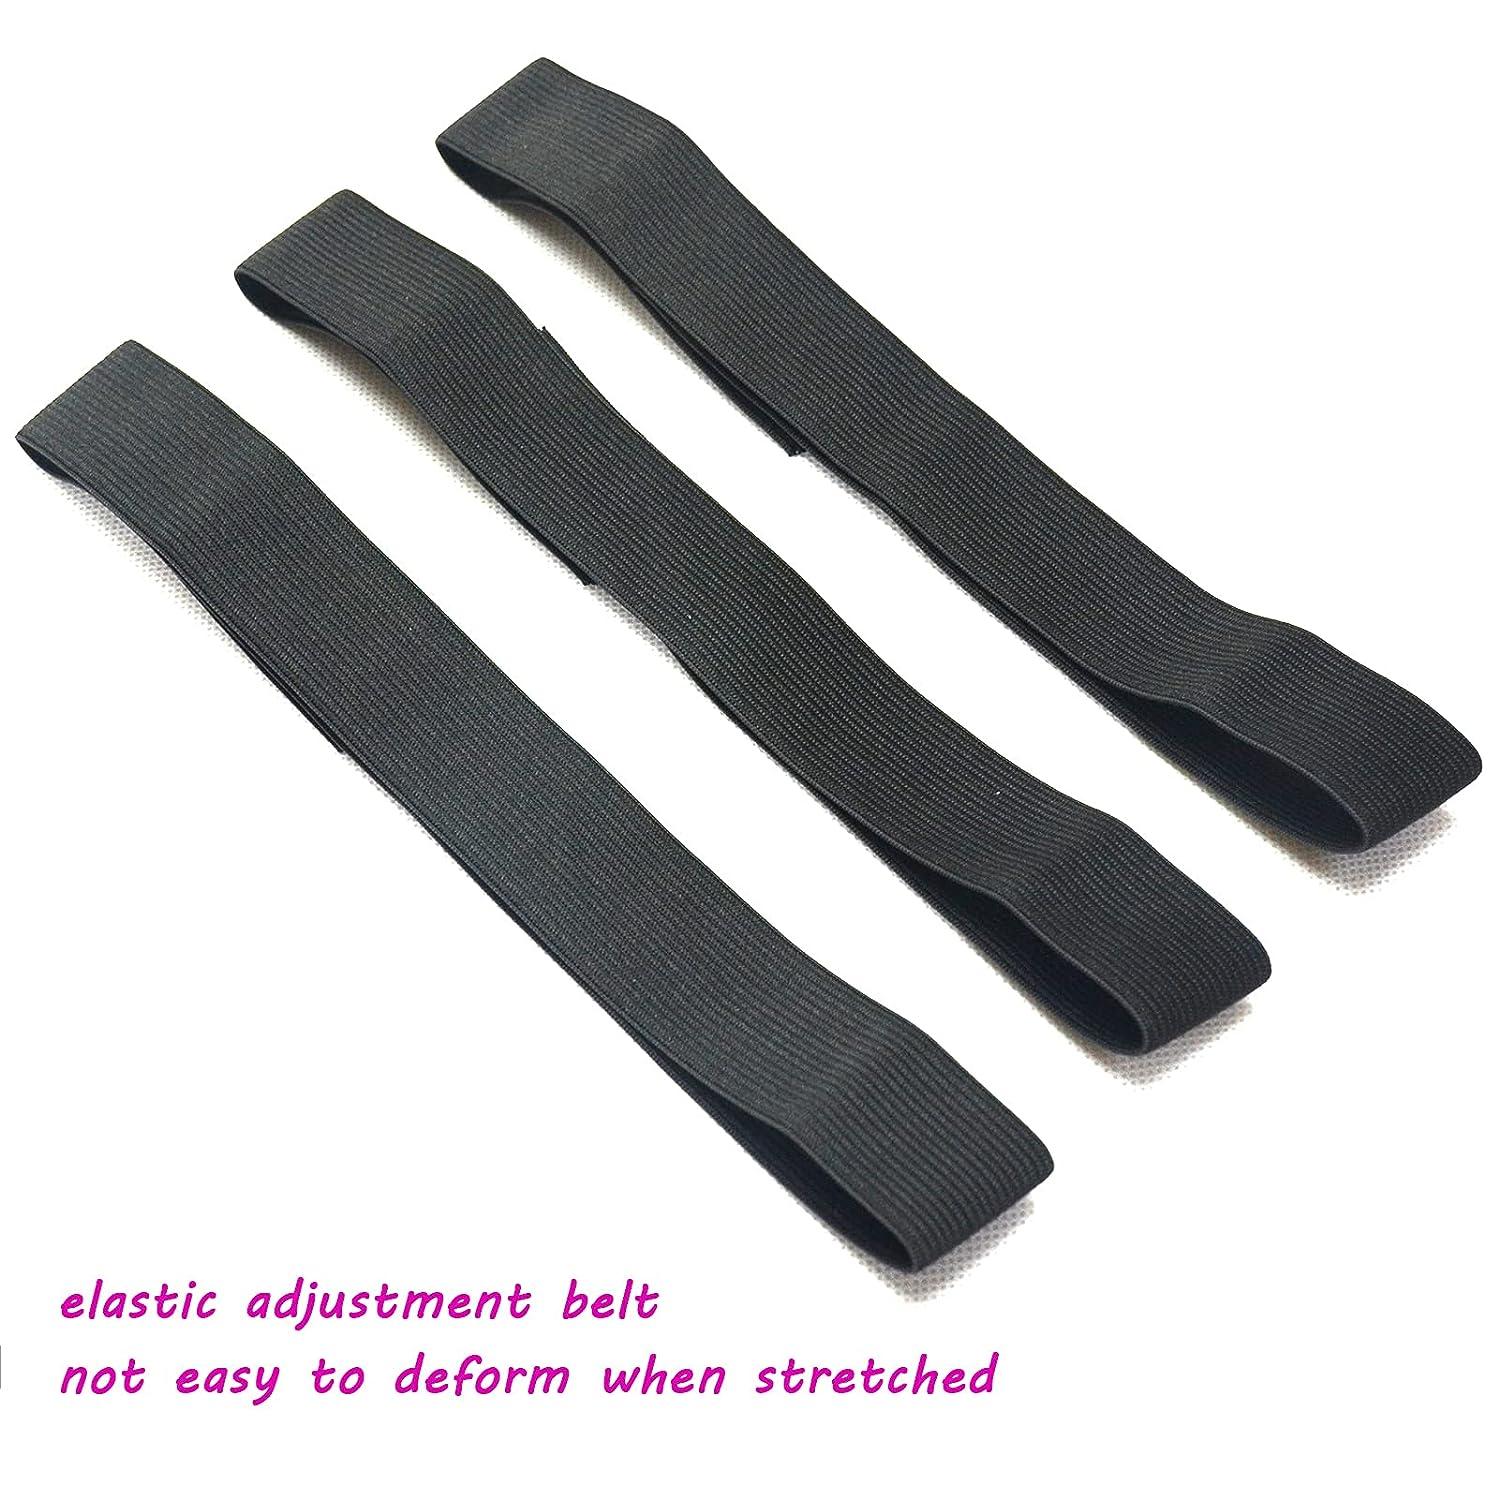 BLUPLE 3 PCS Adjustable Elastic Band for Wigs Edges Lace Melting Bands Edge  laying Bands Elastic Wig Bands with Velcr Thick Comfortable Durable (3 PCS  Black) 3 PCS Black